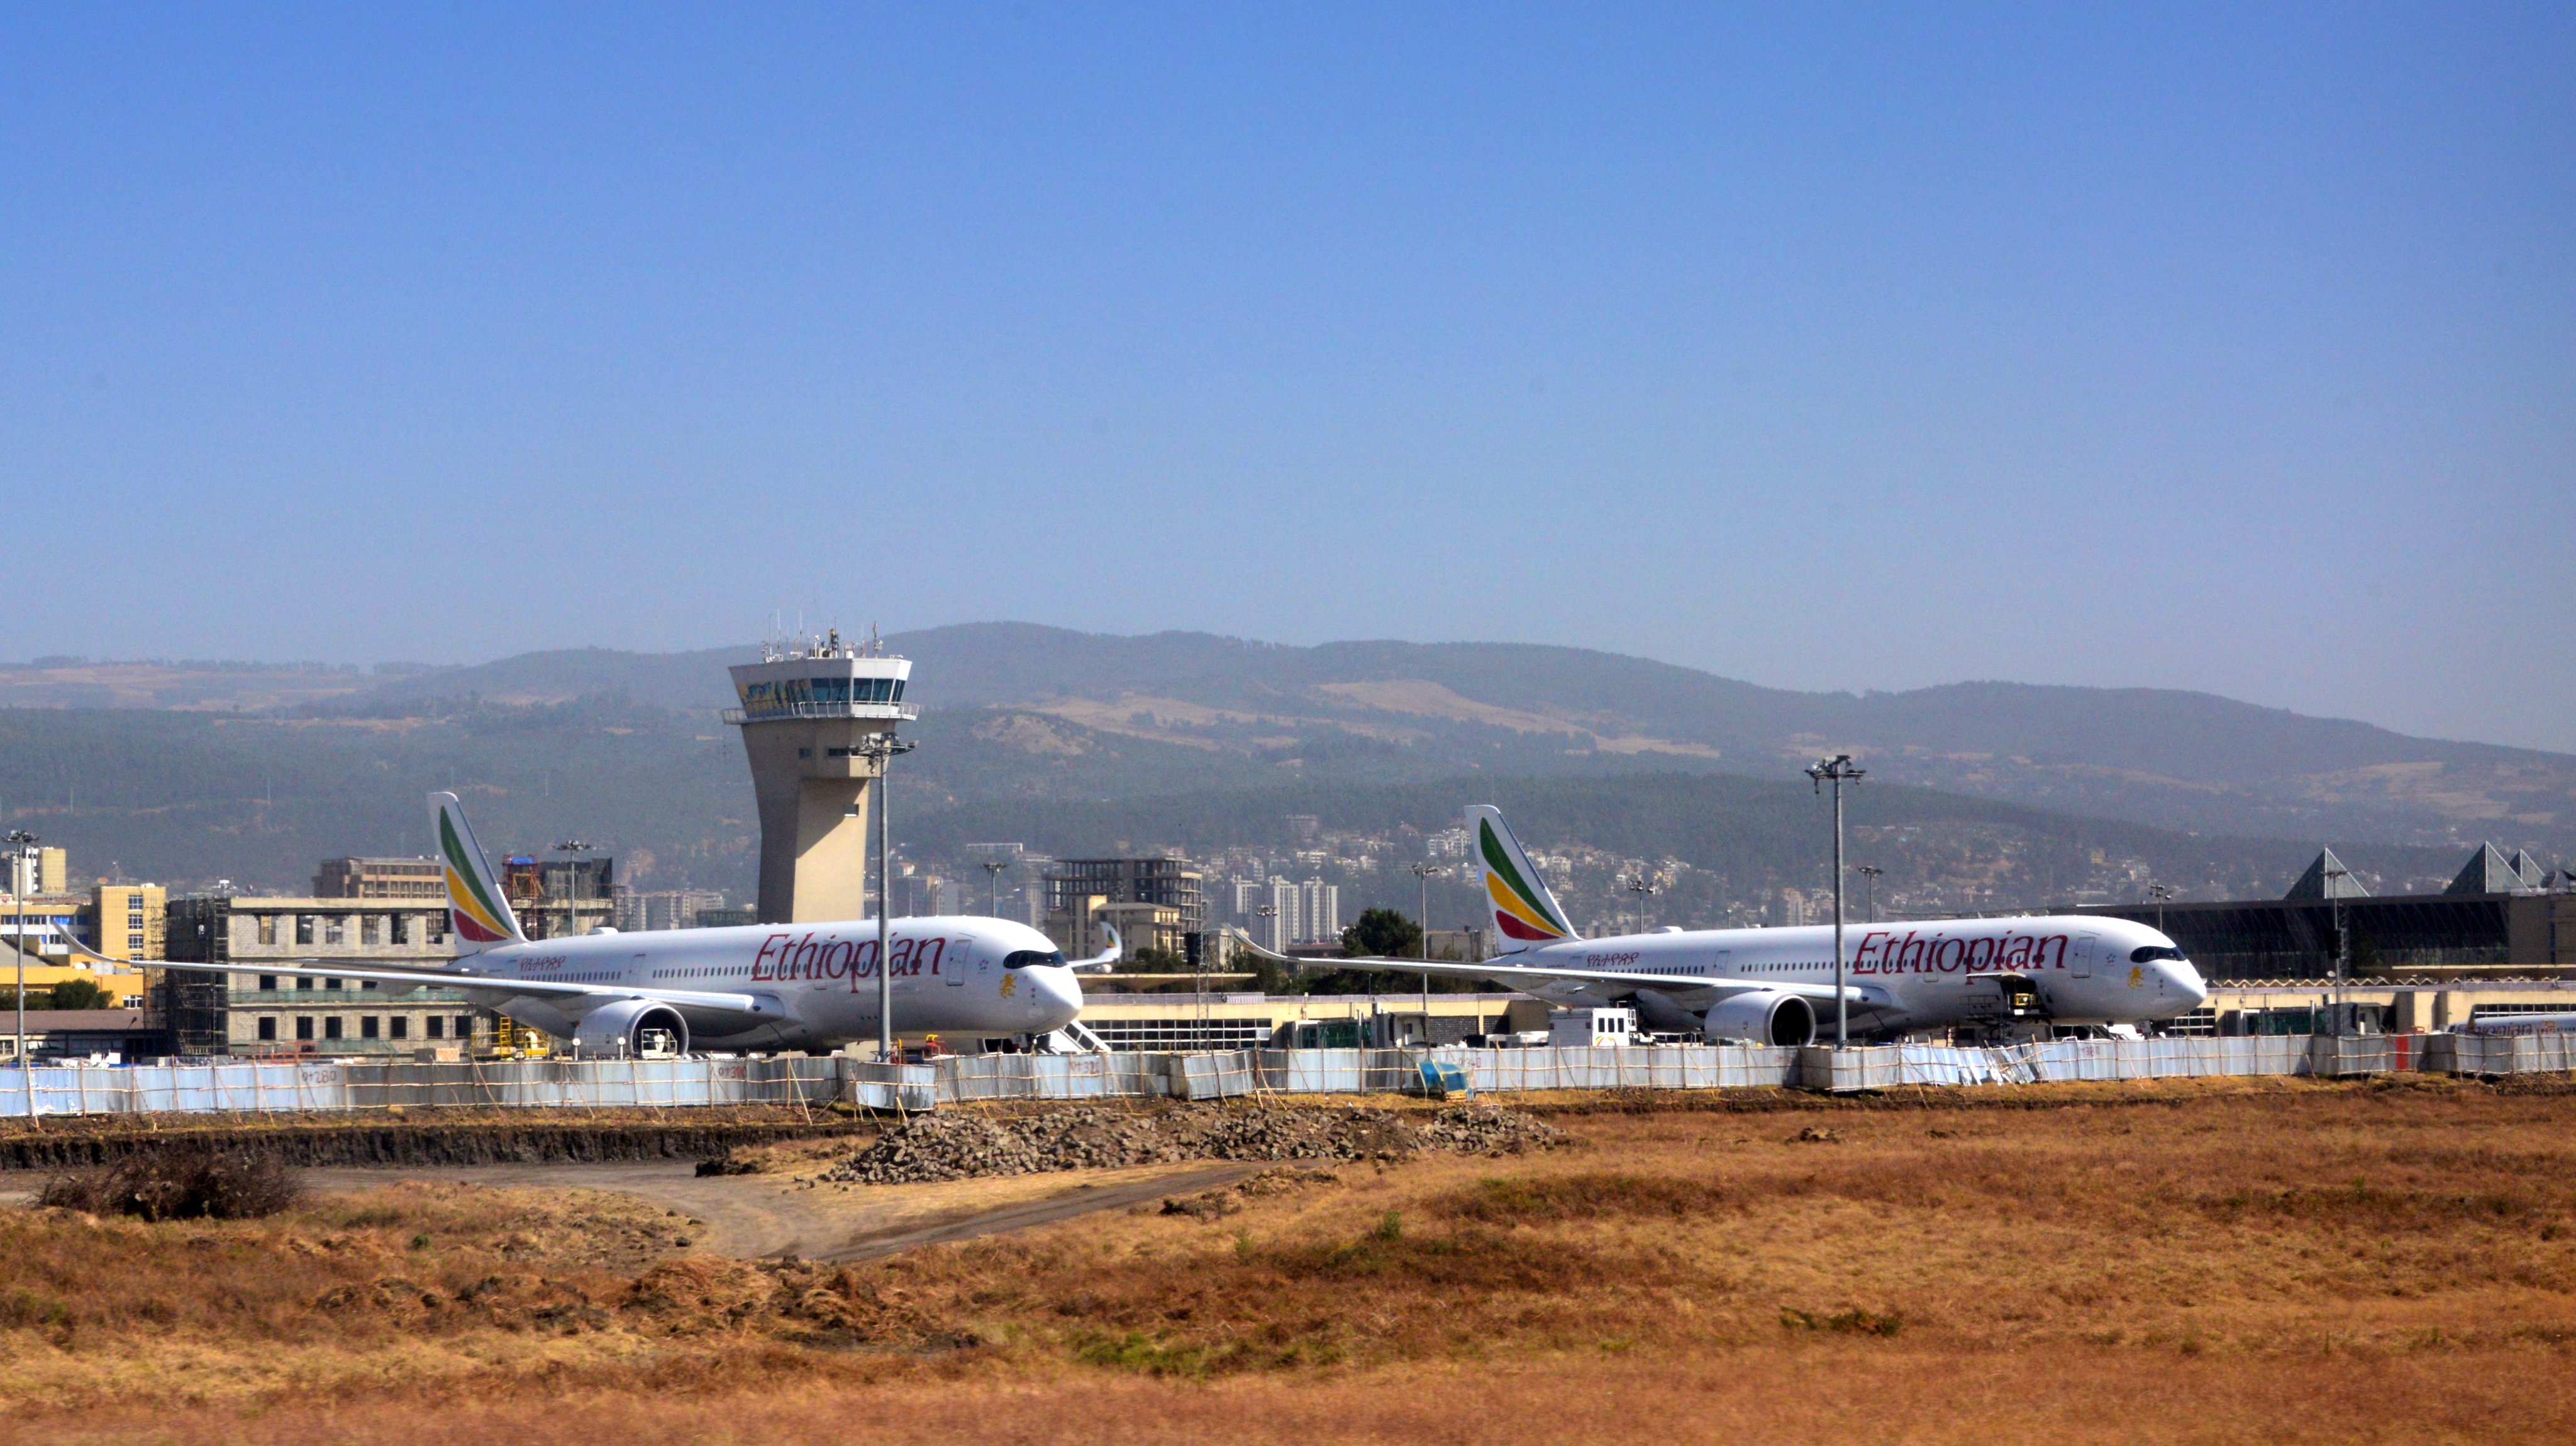 Addis Ababa Bole International Airport - control tower, Terminal 2 and Ethiopian Airlines Airbus A350 aircraft, Ethiopia